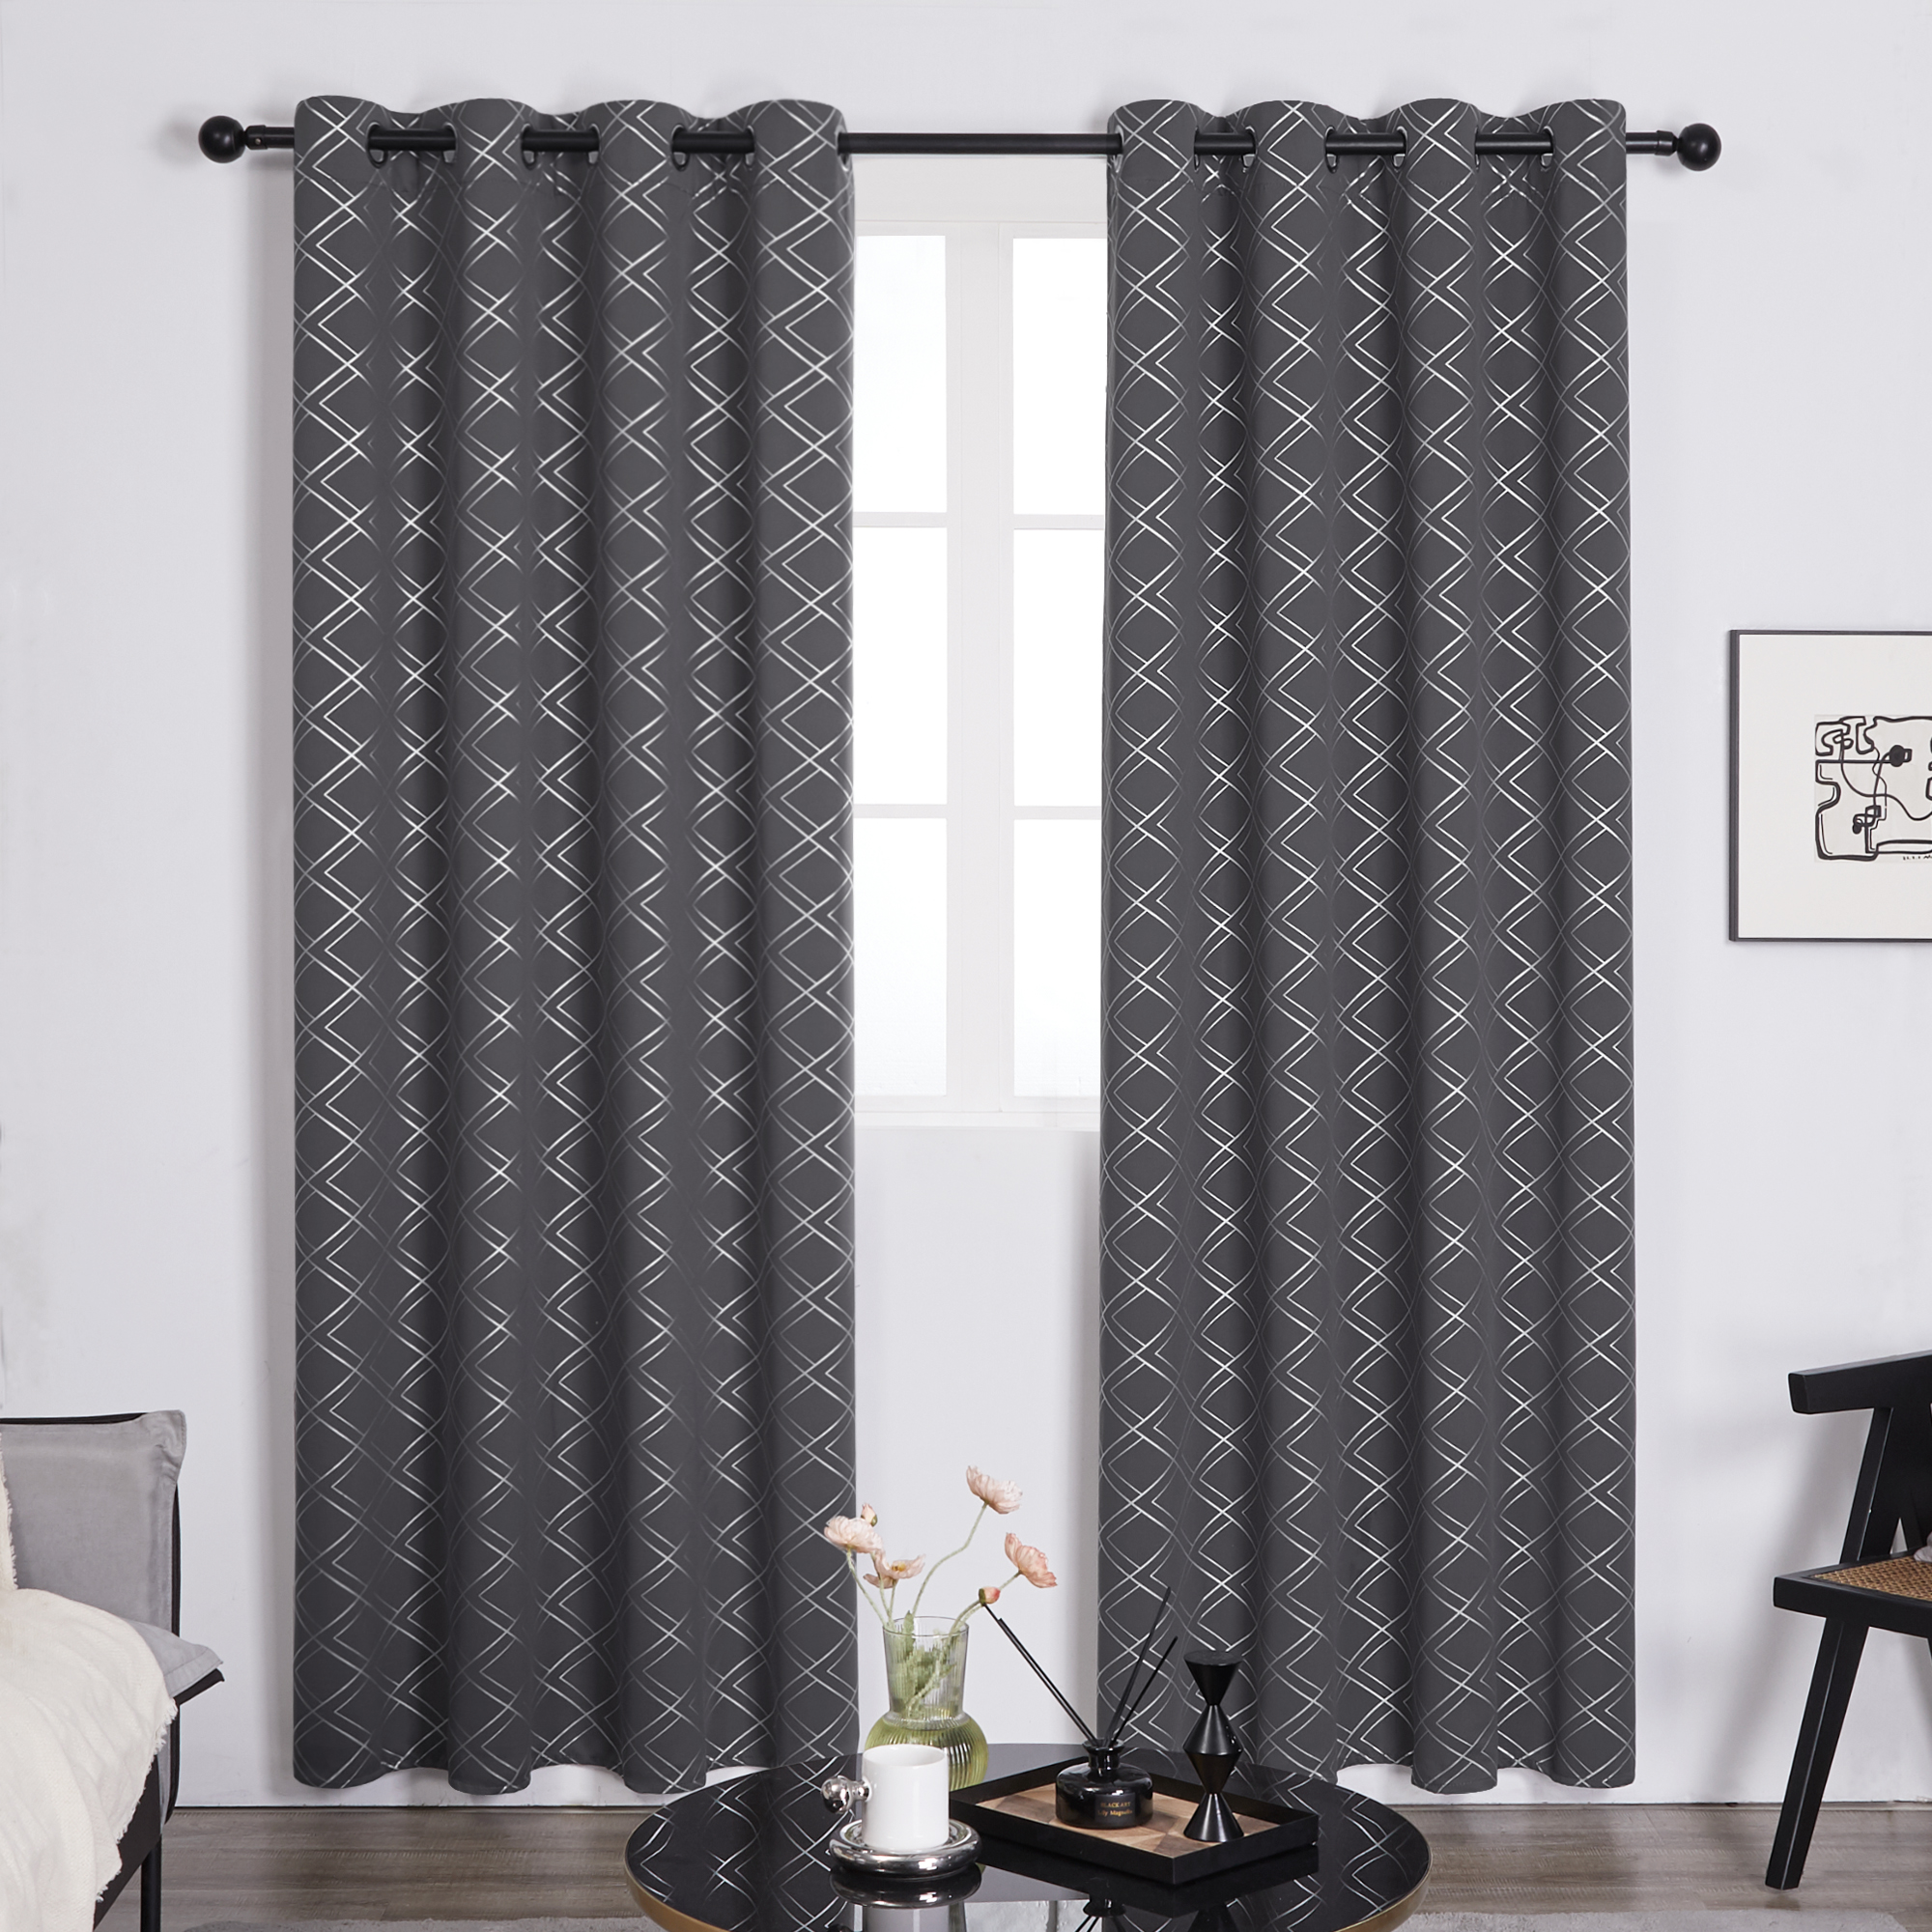 Deconovo Grommet Silver Patterned Blackout Curtains 2 Panels -$9.30~$13.80 + Free Shipping w/ Prime